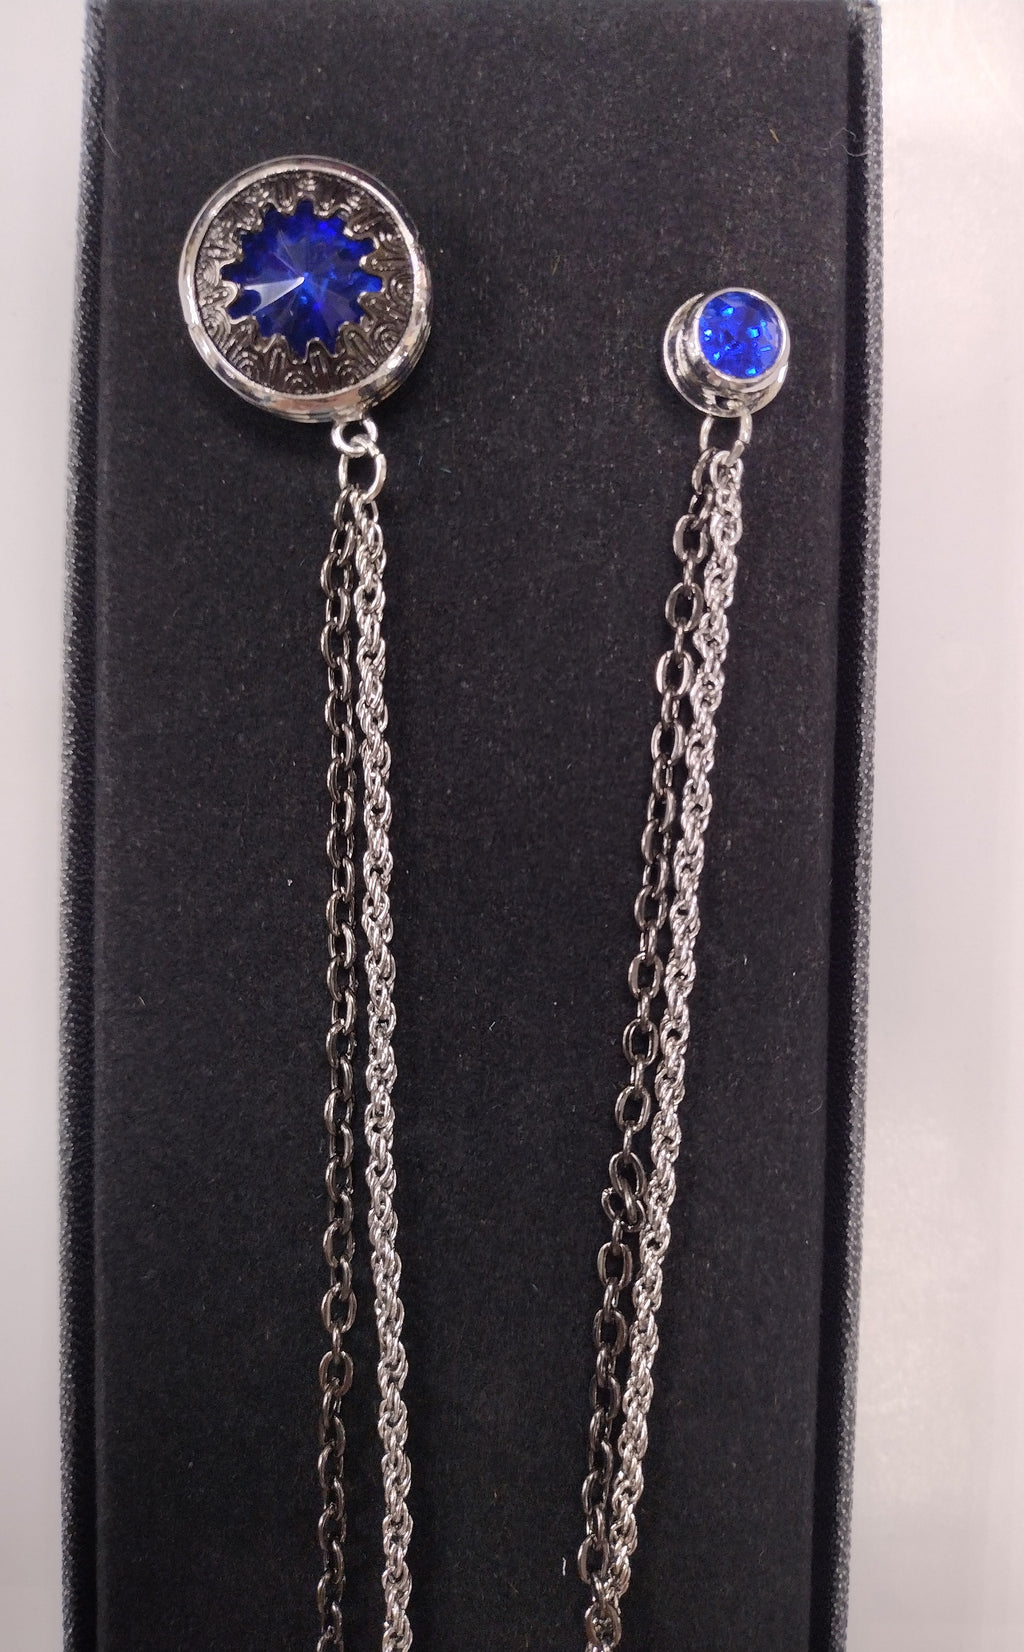 Mens Fancy Lapel Chain Sparkling Silver Pewter with Royal Blue Accent (Pin to Lapel or Breast Pocket)